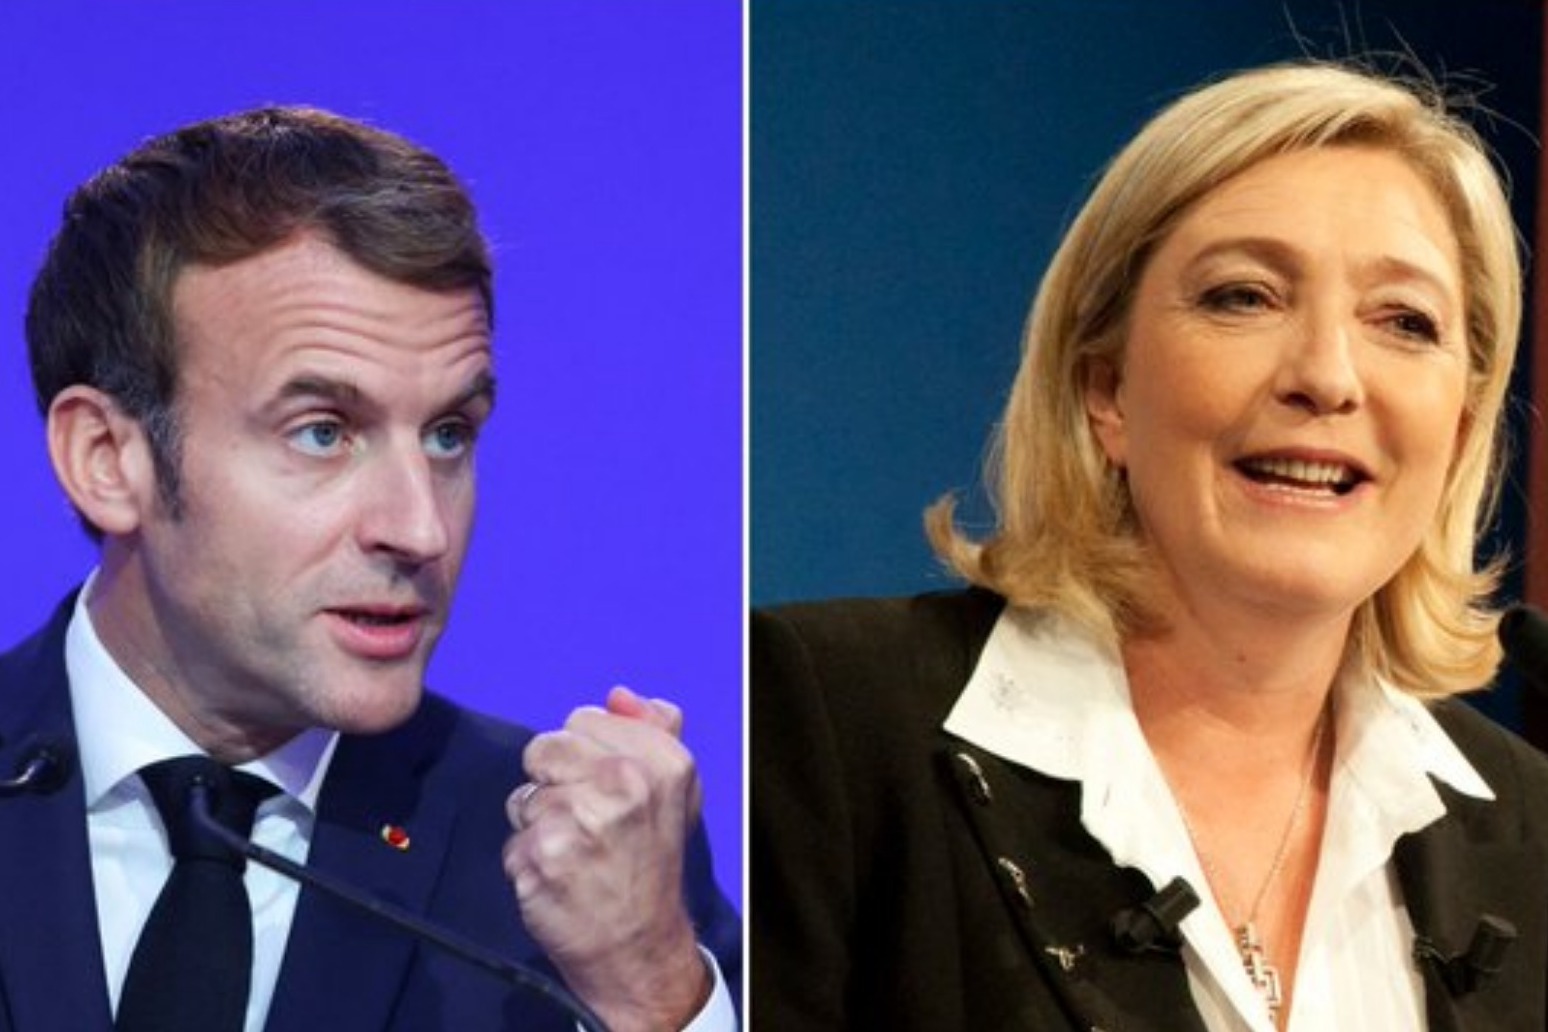 Macron and far right rival Le Pen set for run off in French election